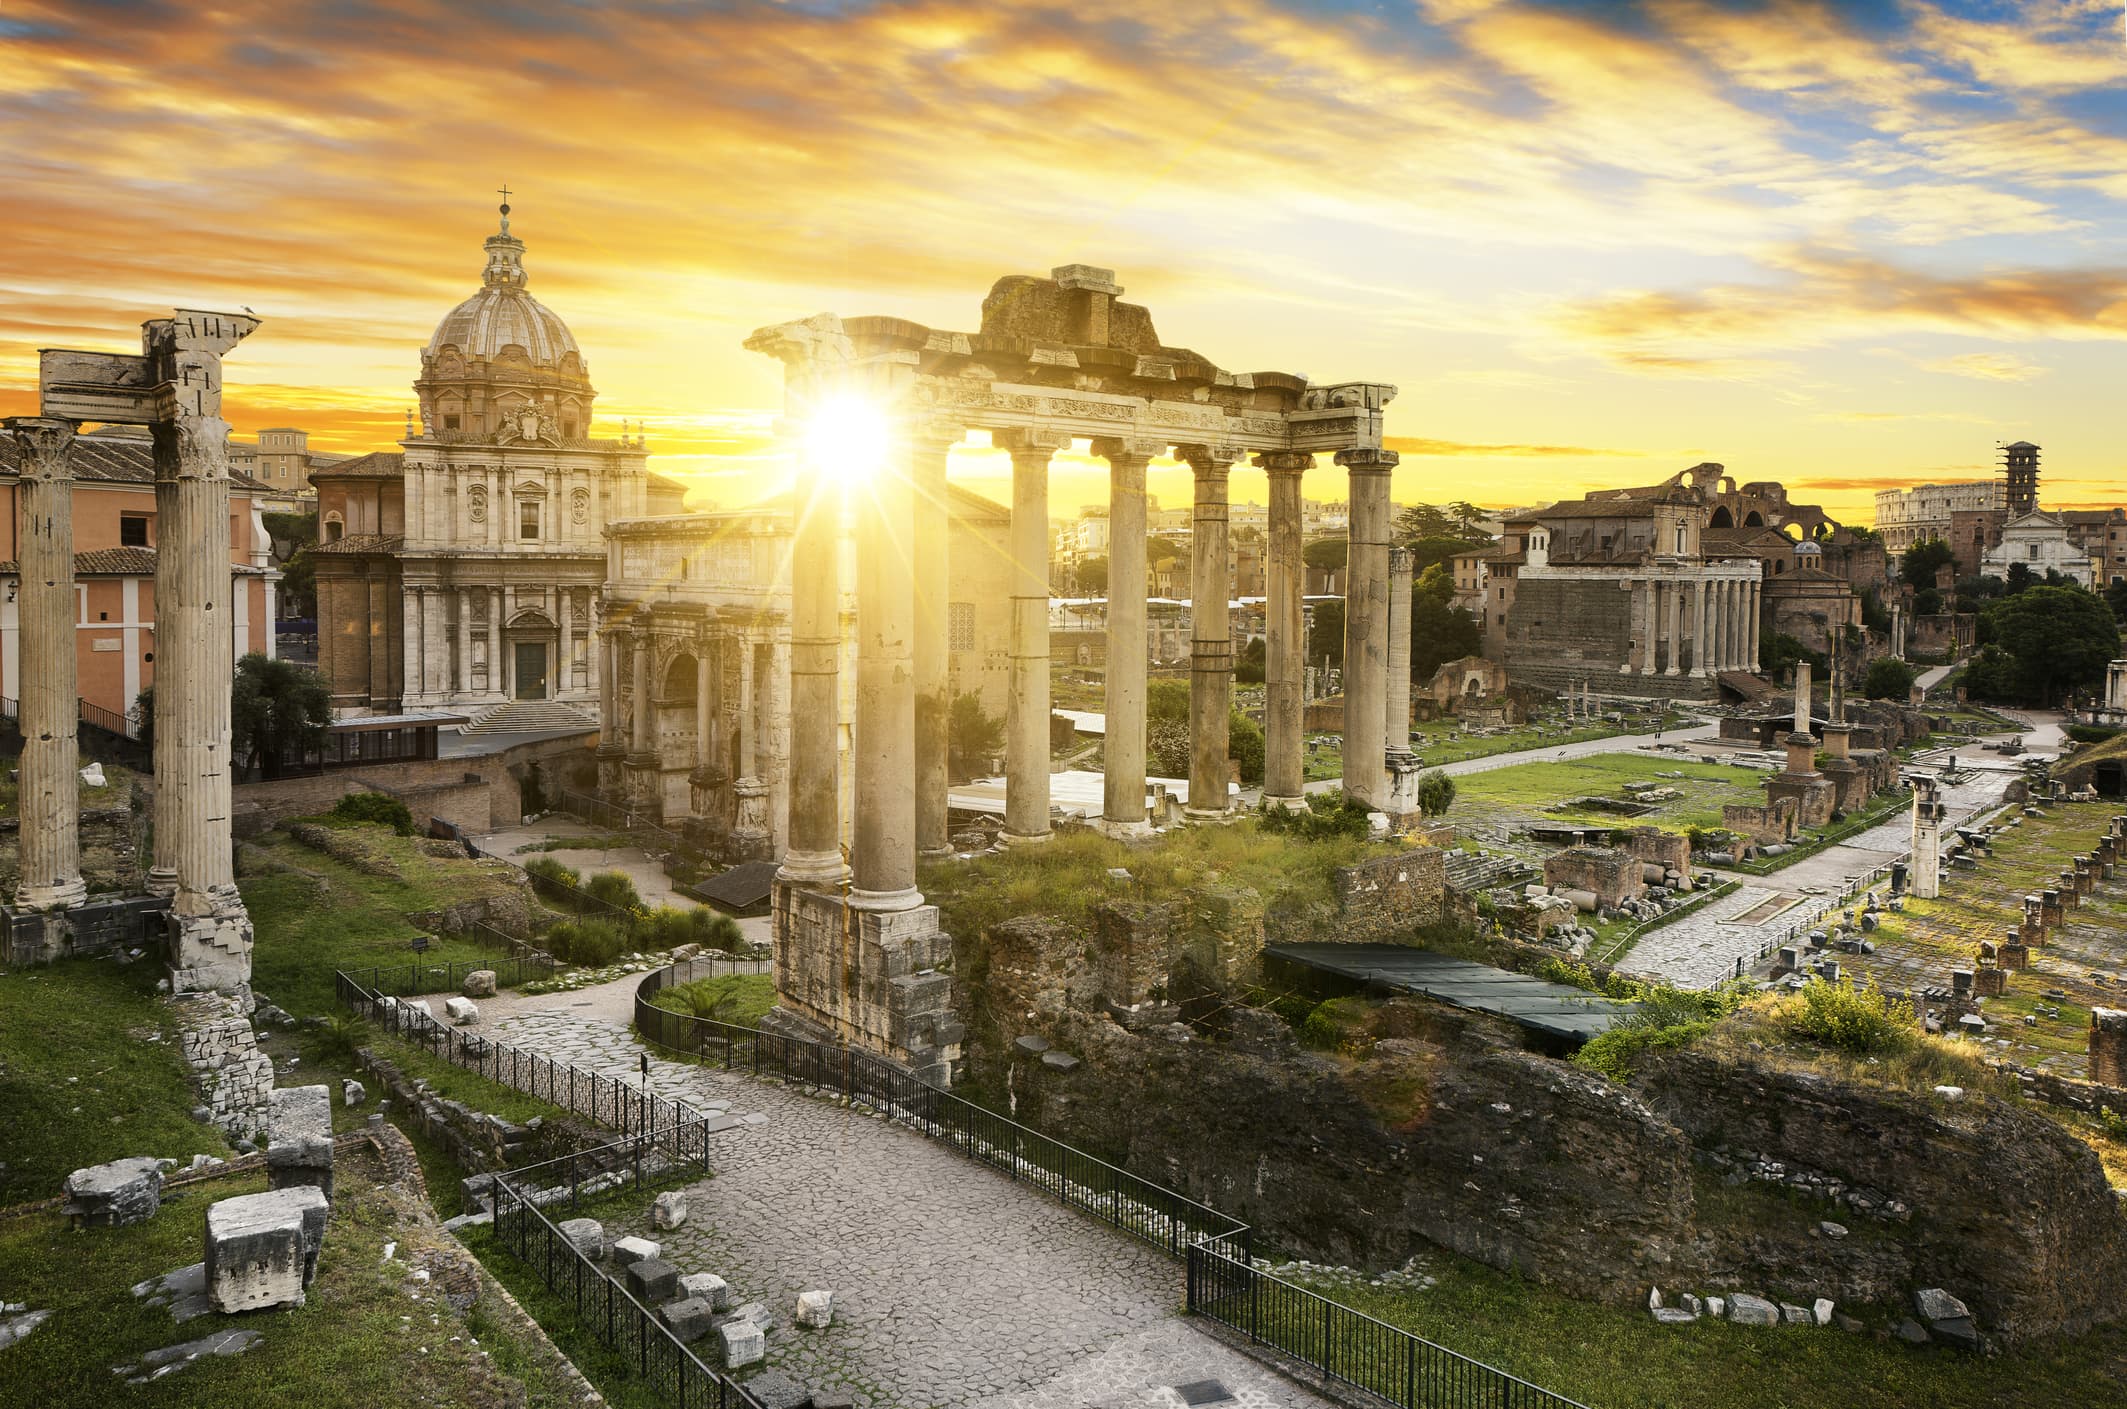 A view of the ruins at the Forum in Rome, Italy